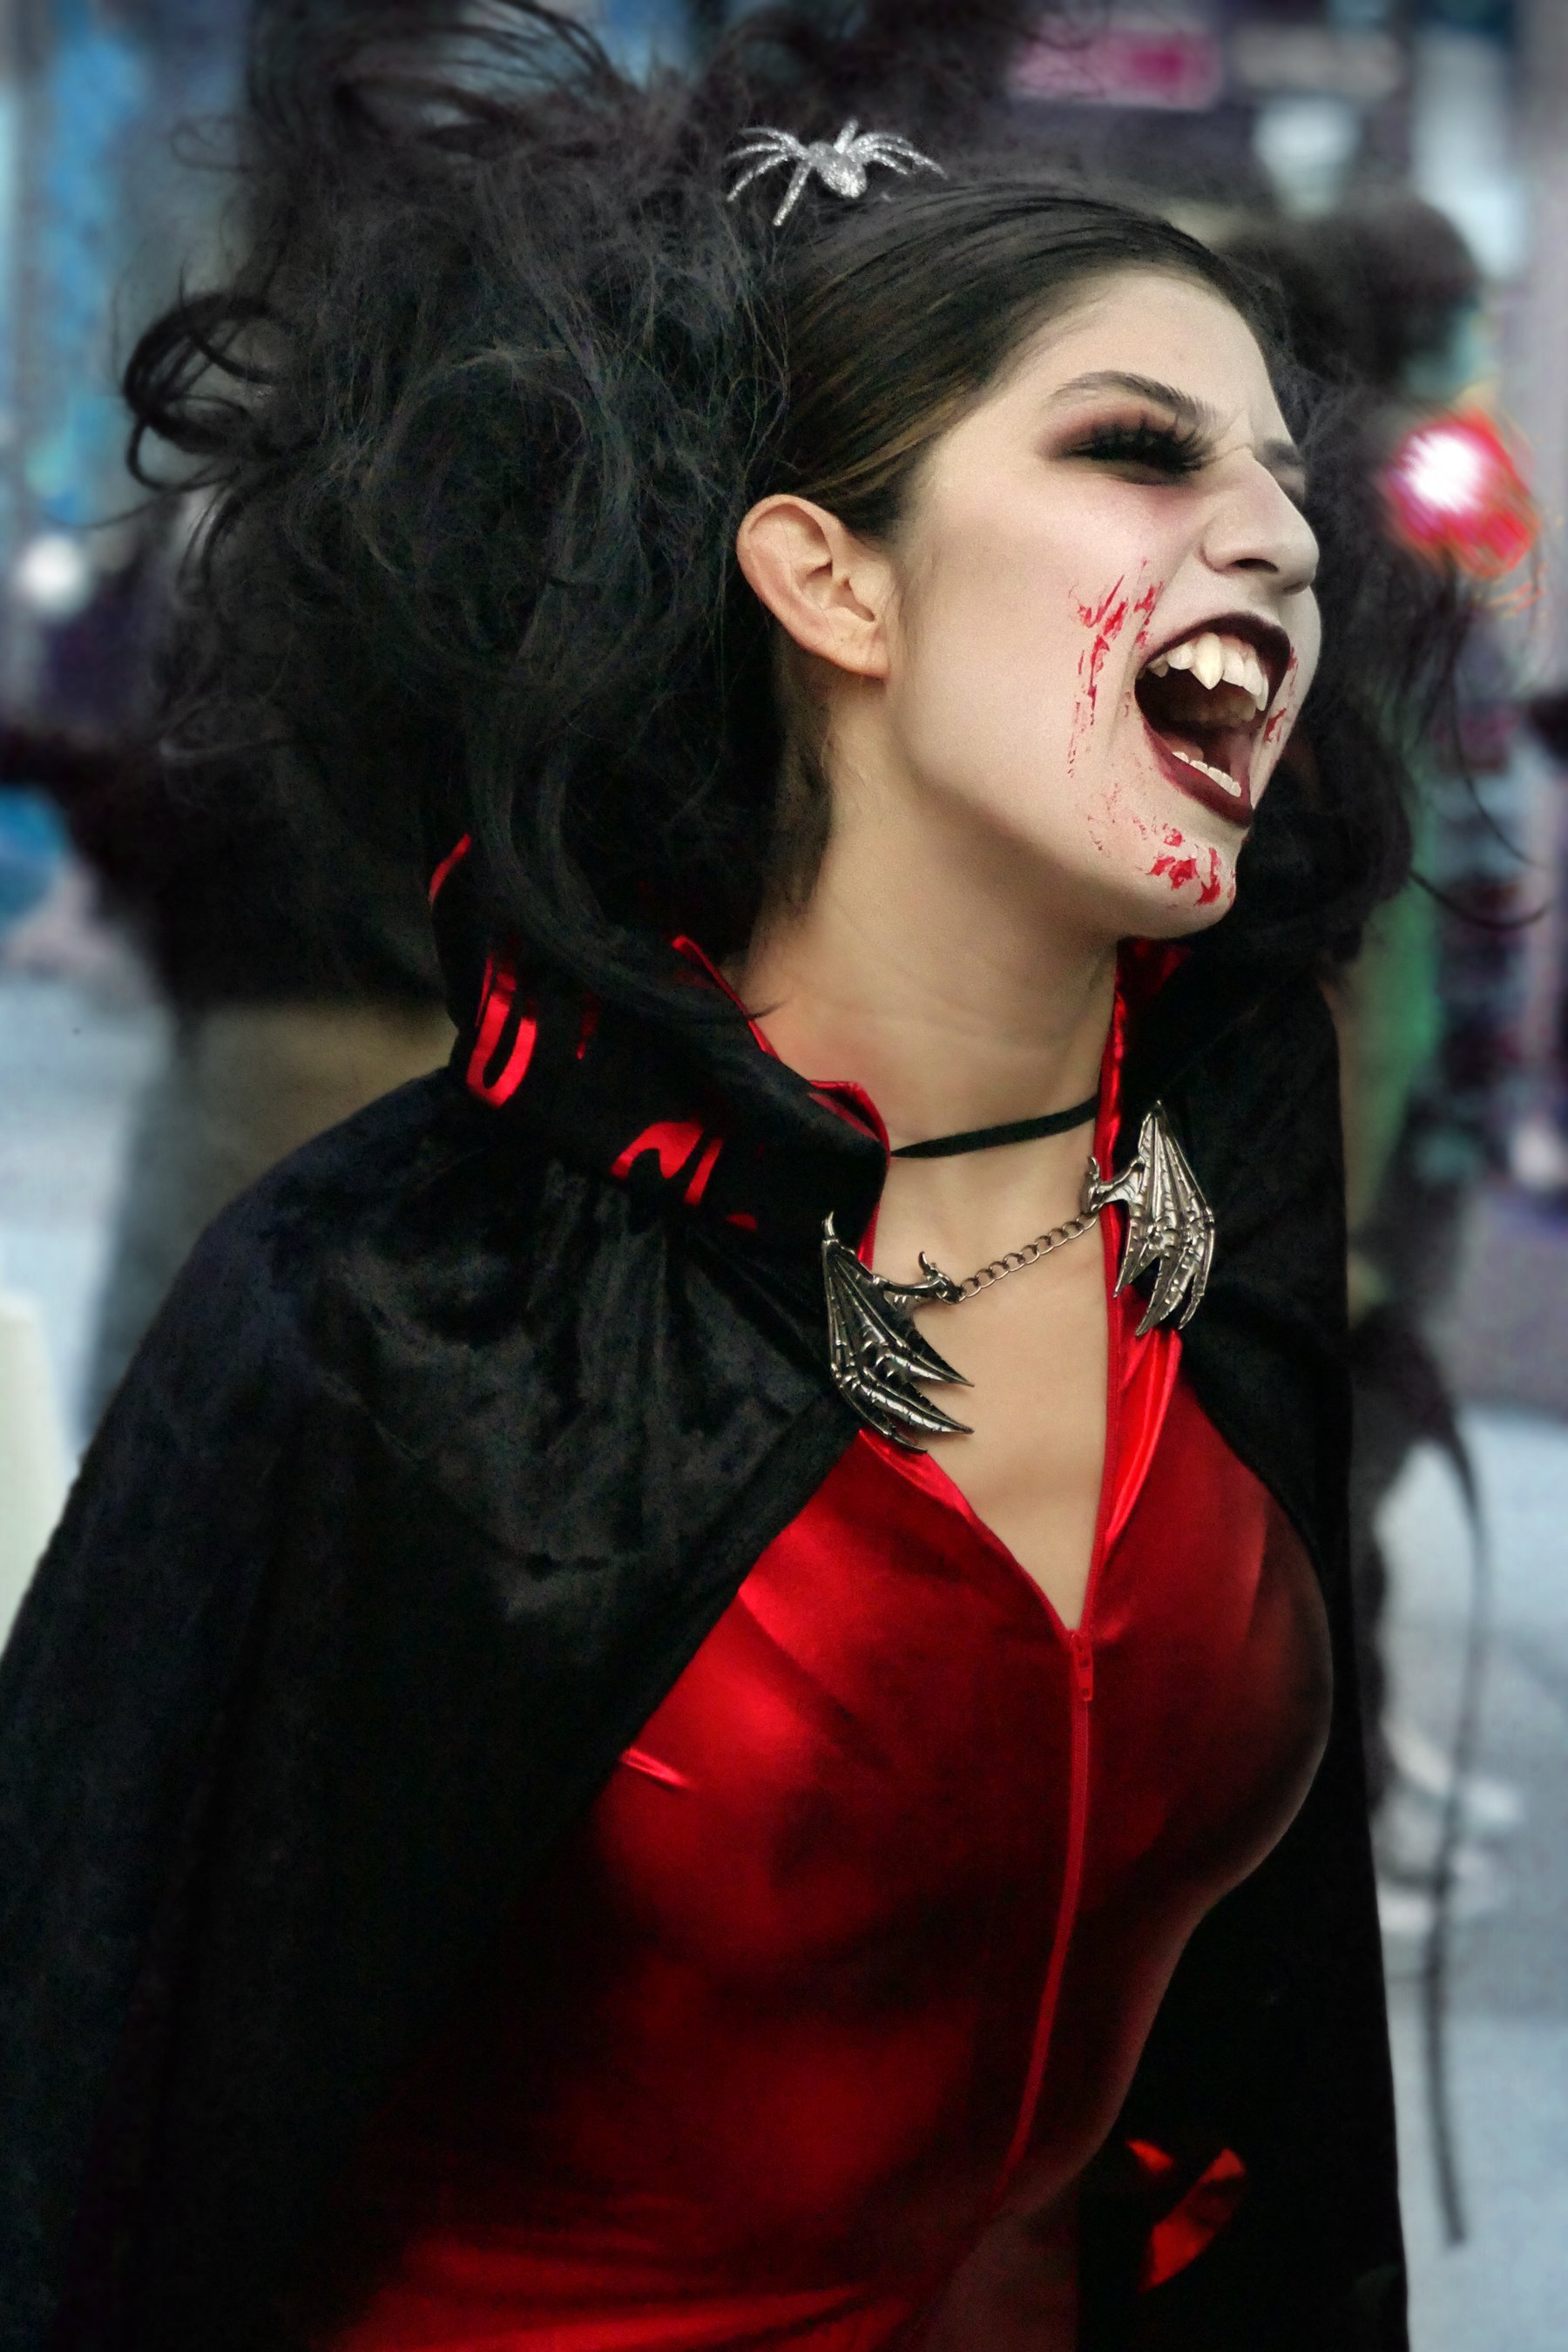 Vampire out for blood.jpg